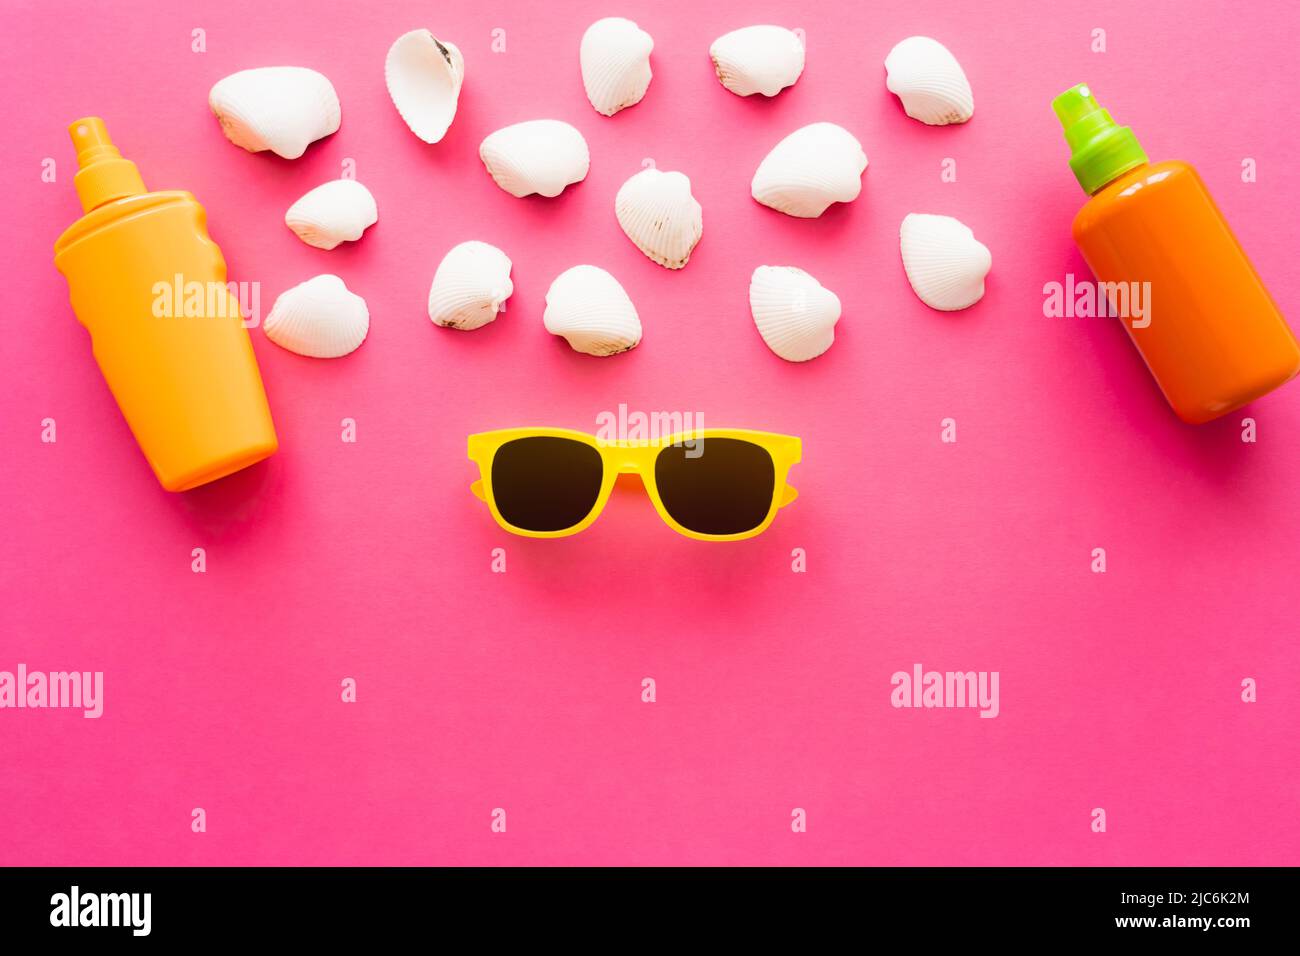 Top view of sunglasses near seashells and sunscreens on pink background Stock Photo